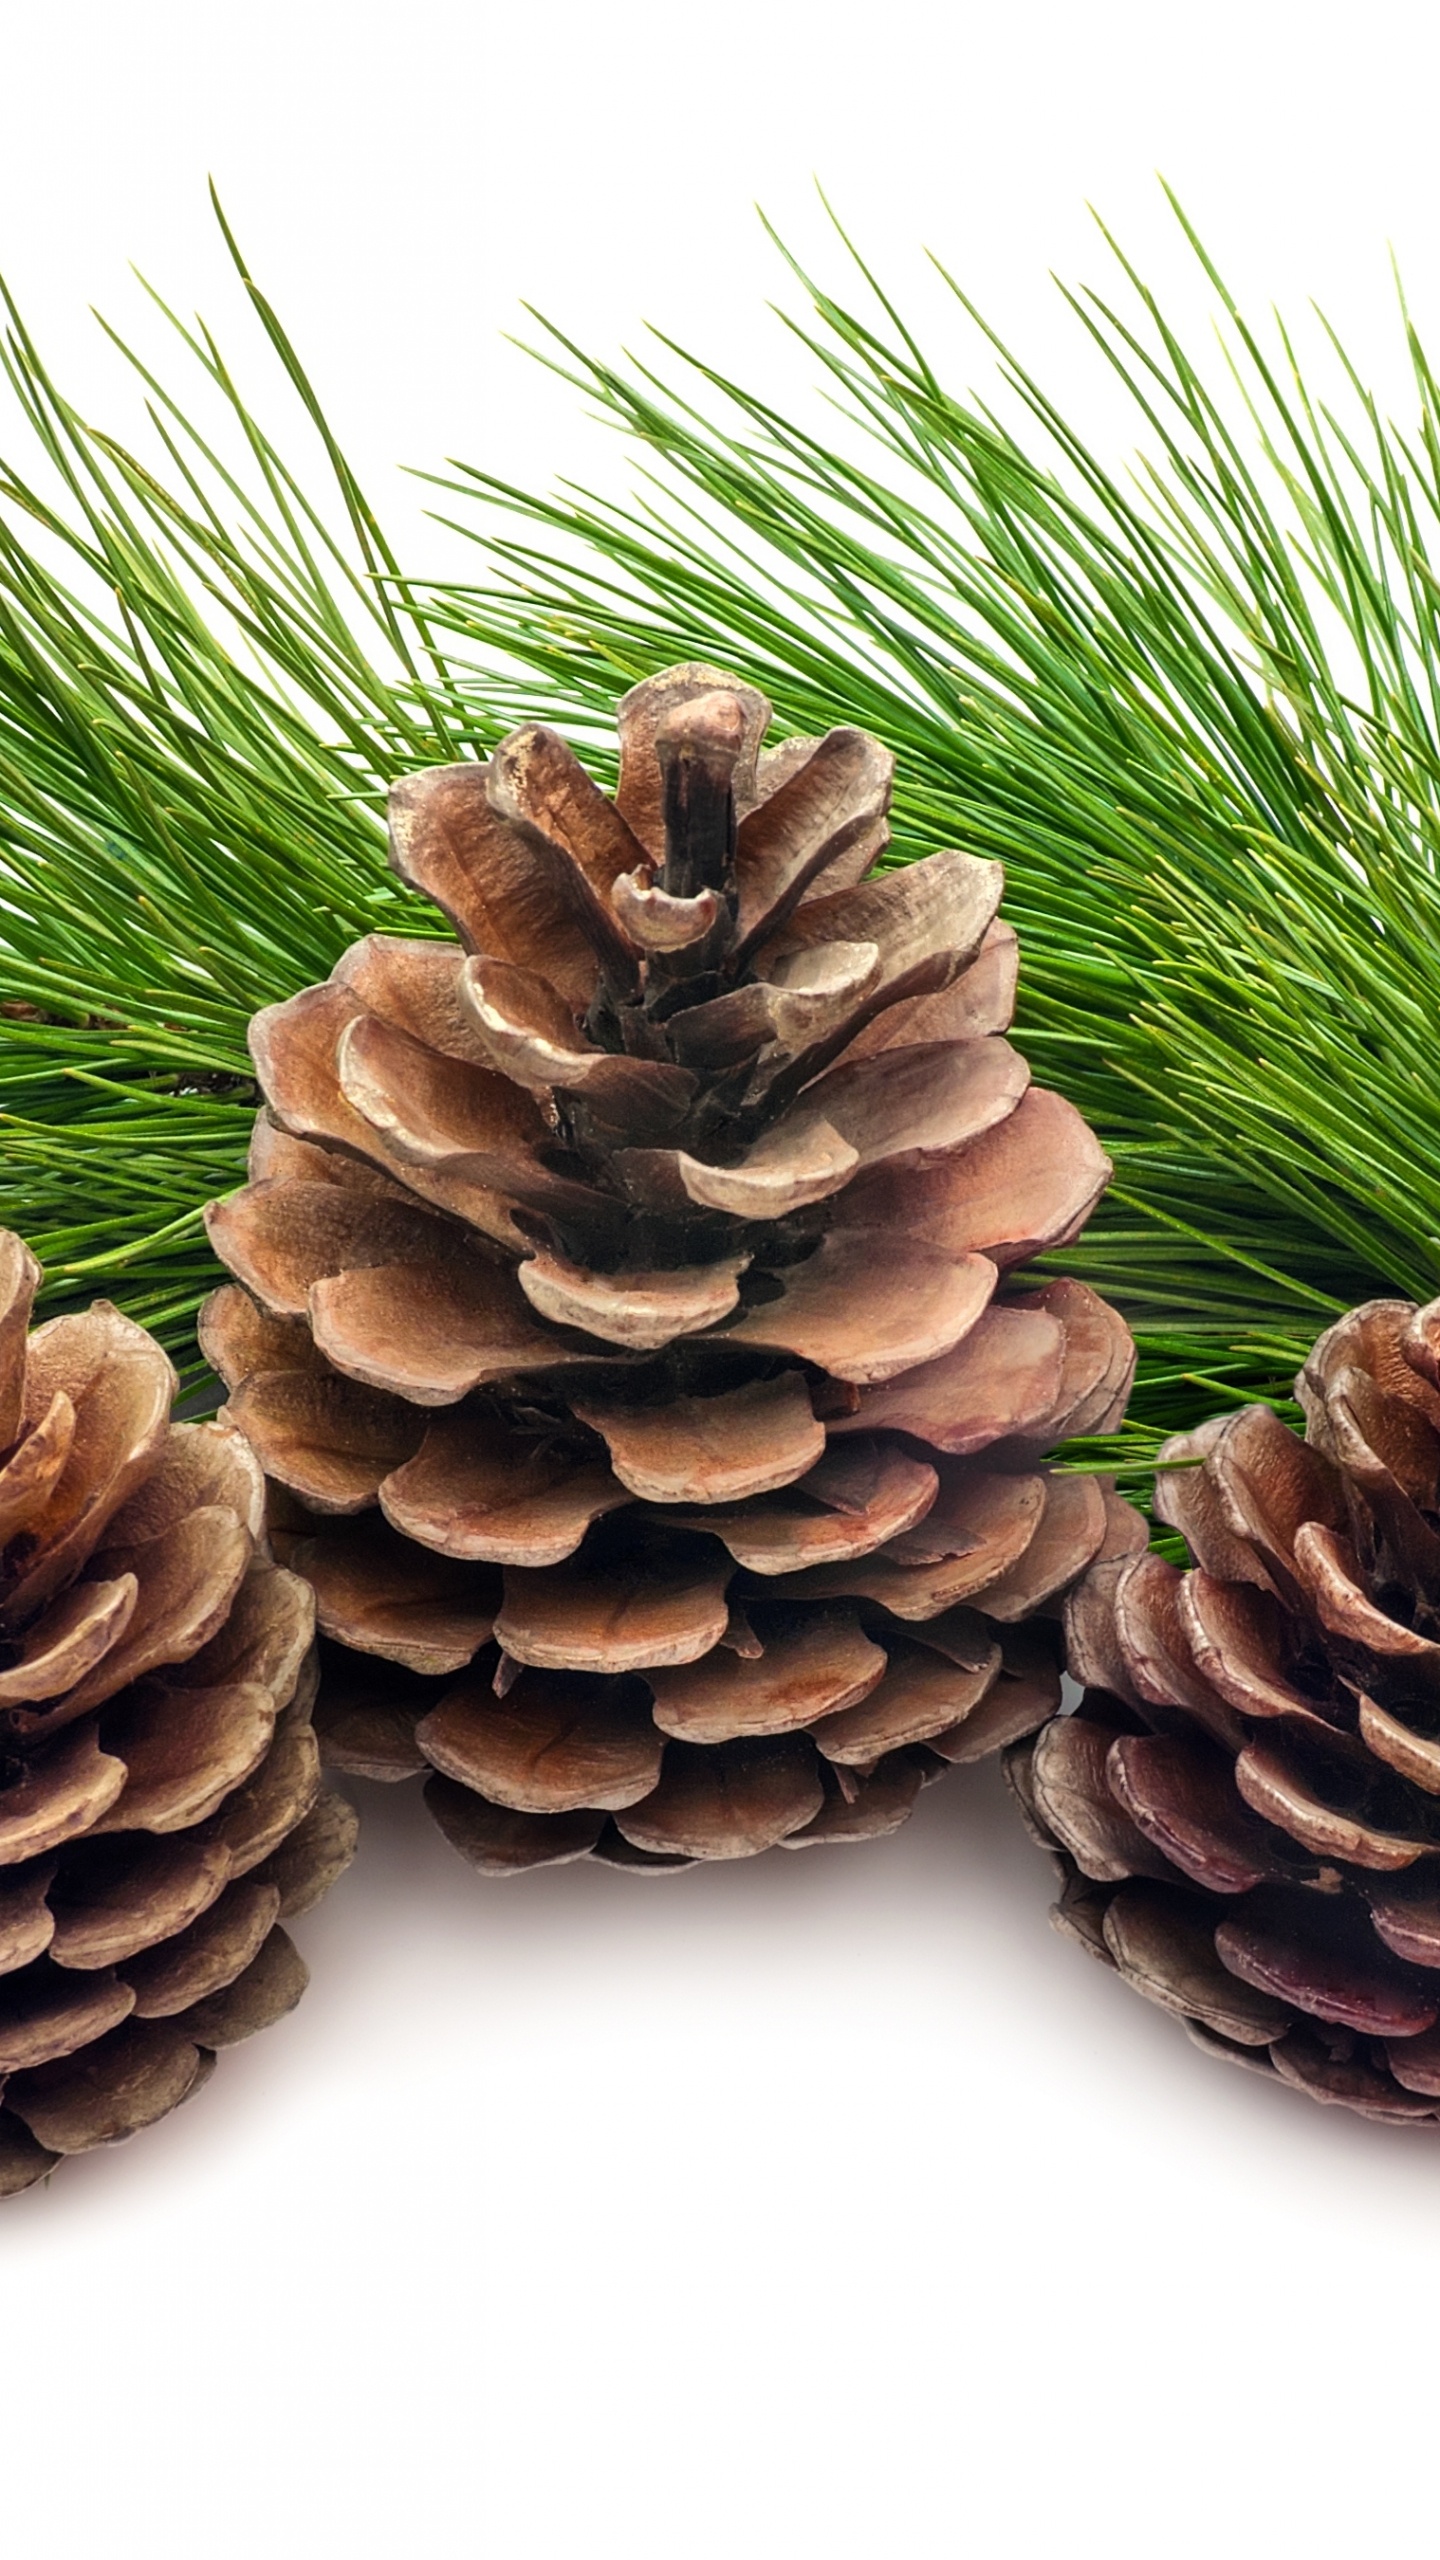 Brown Pine Cone on White Background. Wallpaper in 1440x2560 Resolution